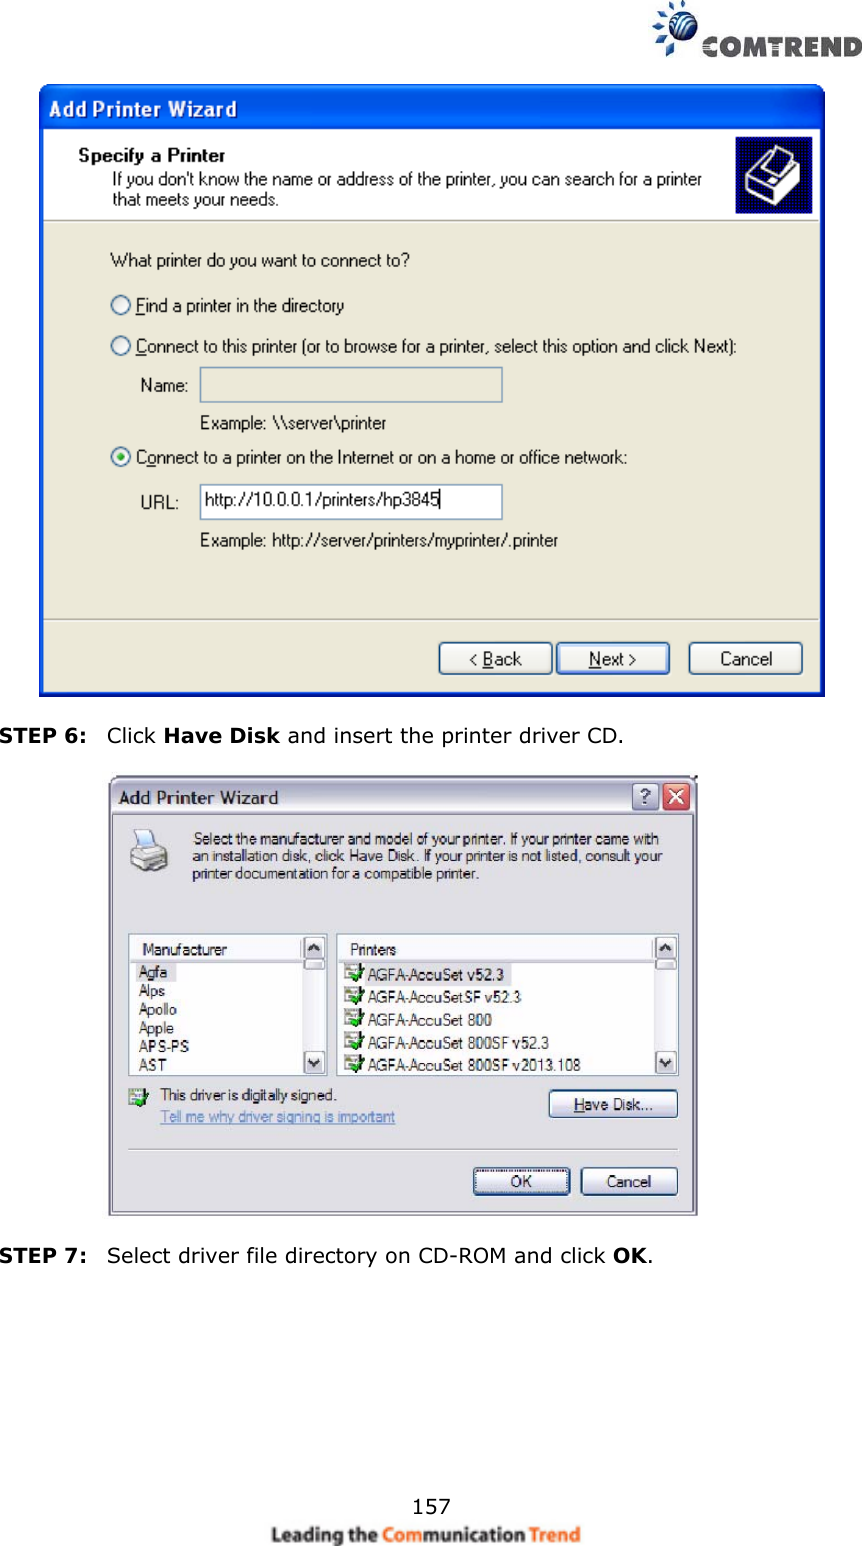    157   STEP 6:  Click Have Disk and insert the printer driver CD.       STEP 7:  Select driver file directory on CD-ROM and click OK.          